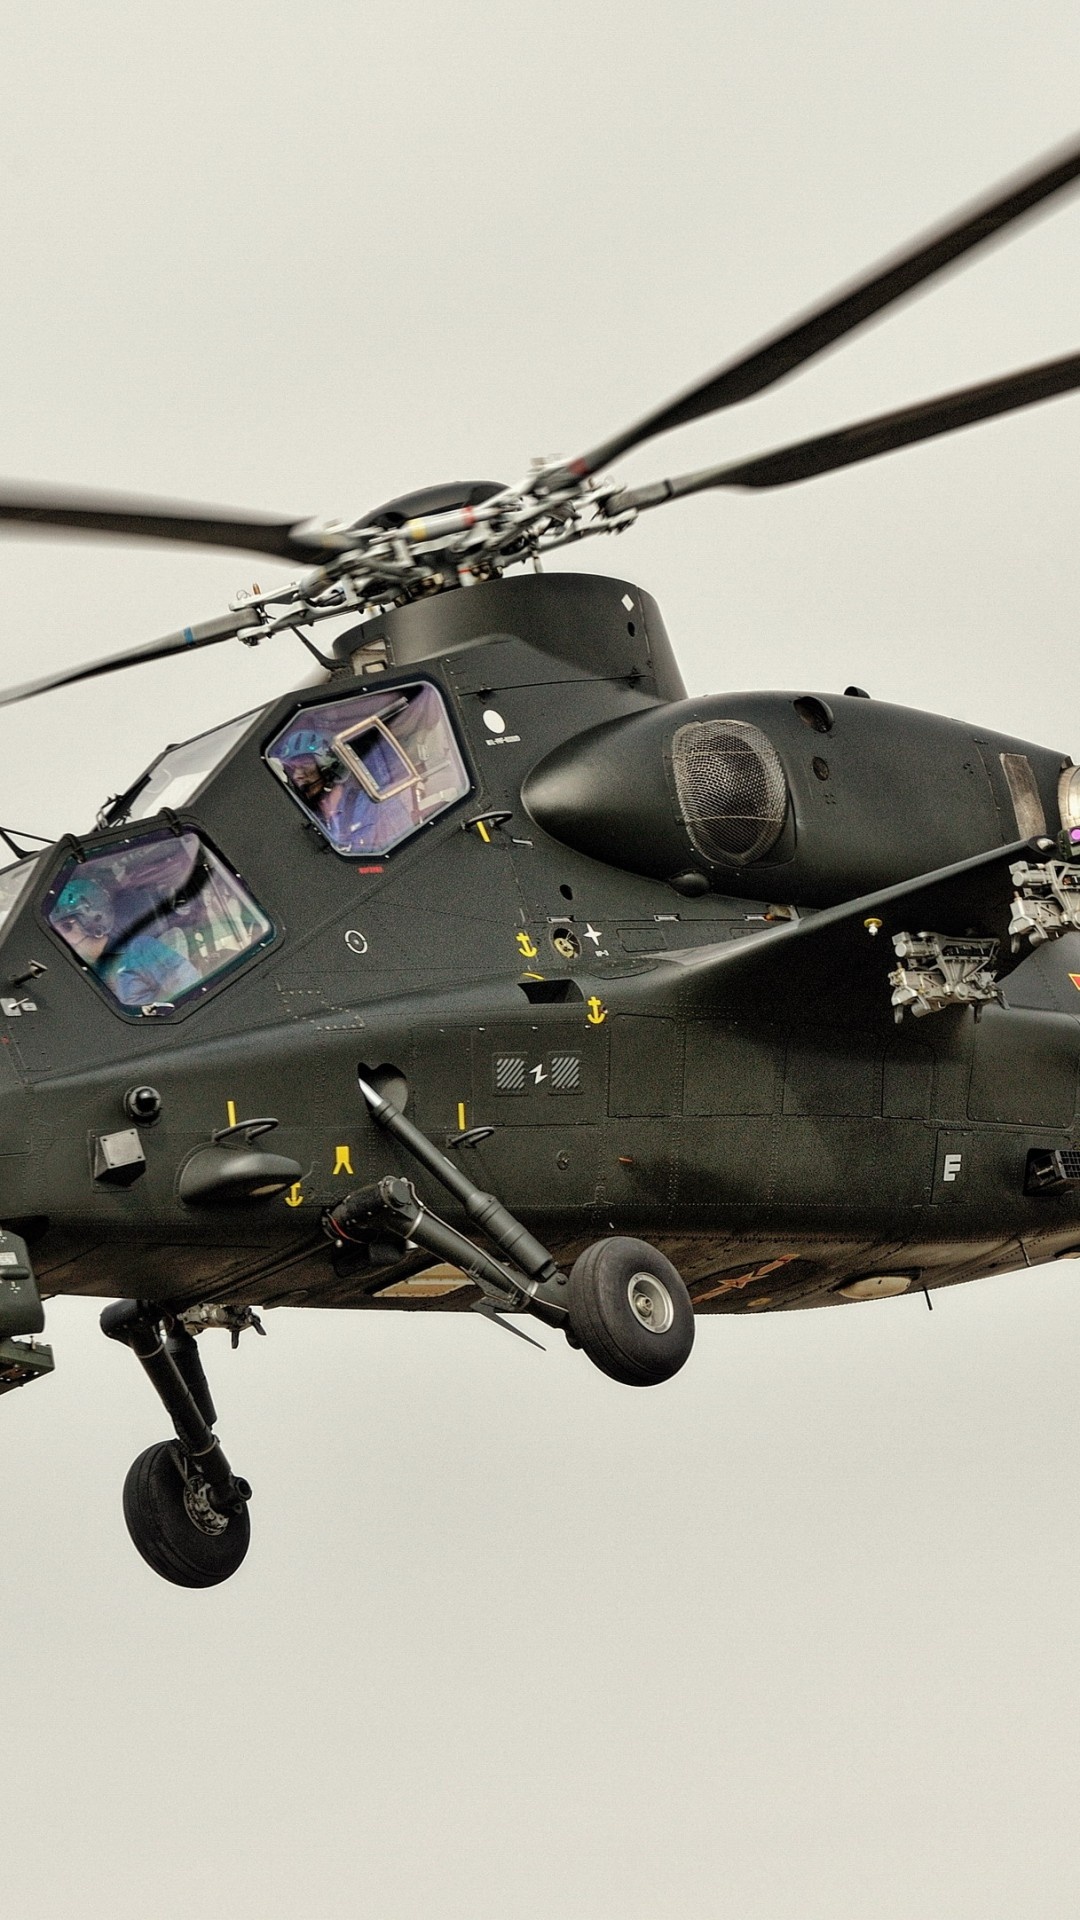 Wallpaper CAIC Z-10, attack helicopter, China Air Force, Military #8046 1080x1920